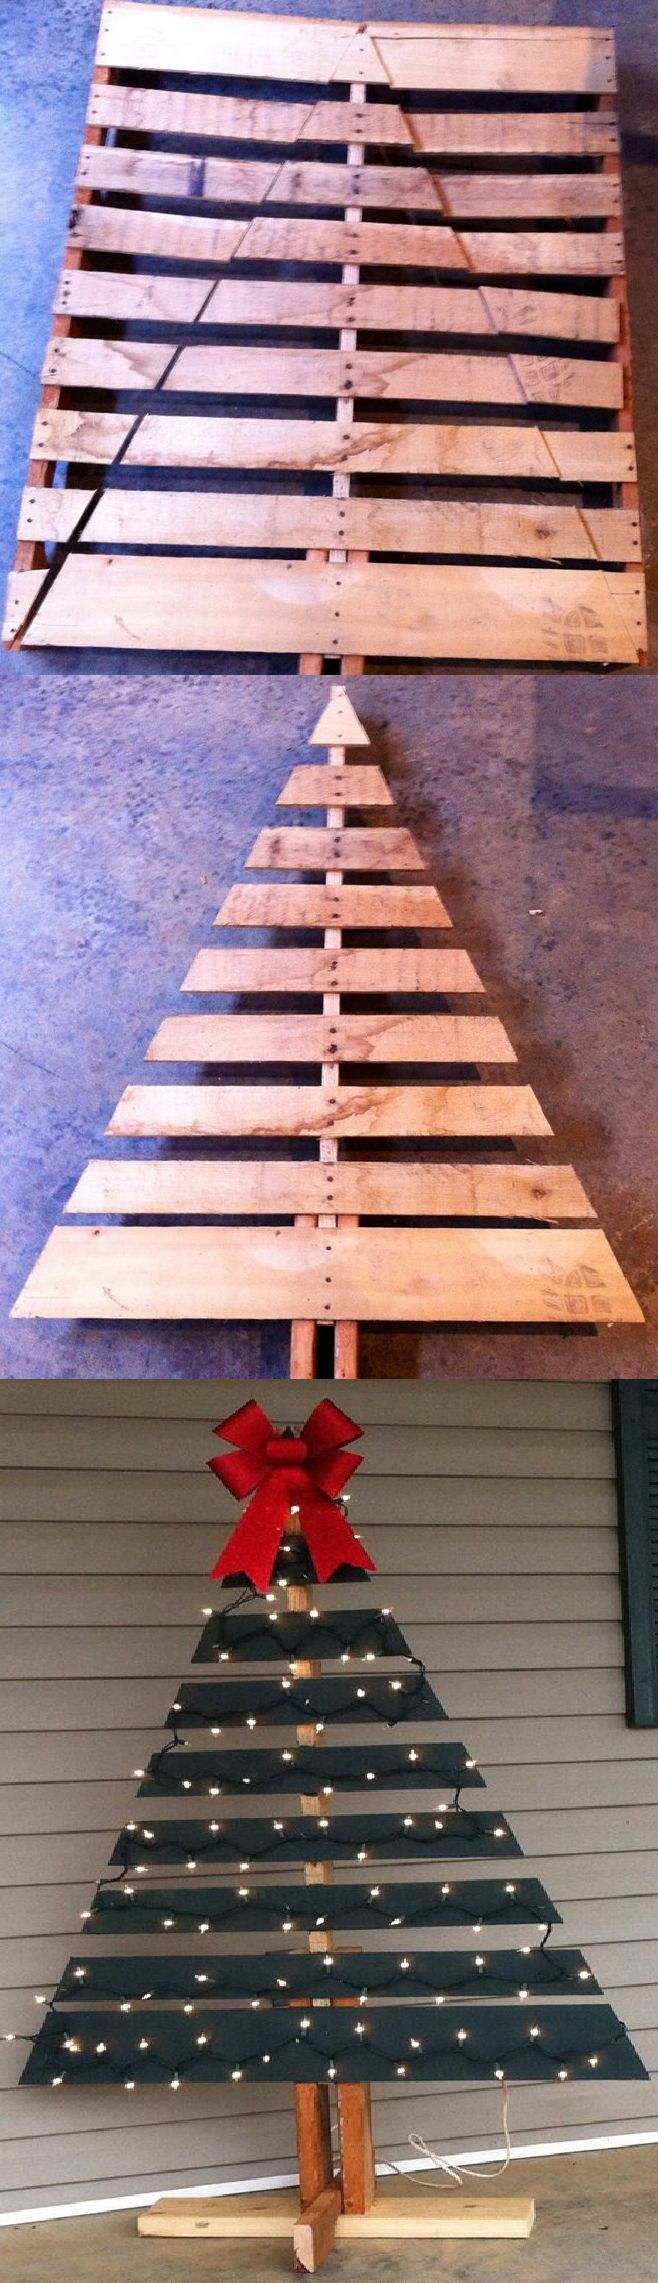 Cool DIY Recycled Pallet Christmas Trees -   DIY Christmas Tree Ideas